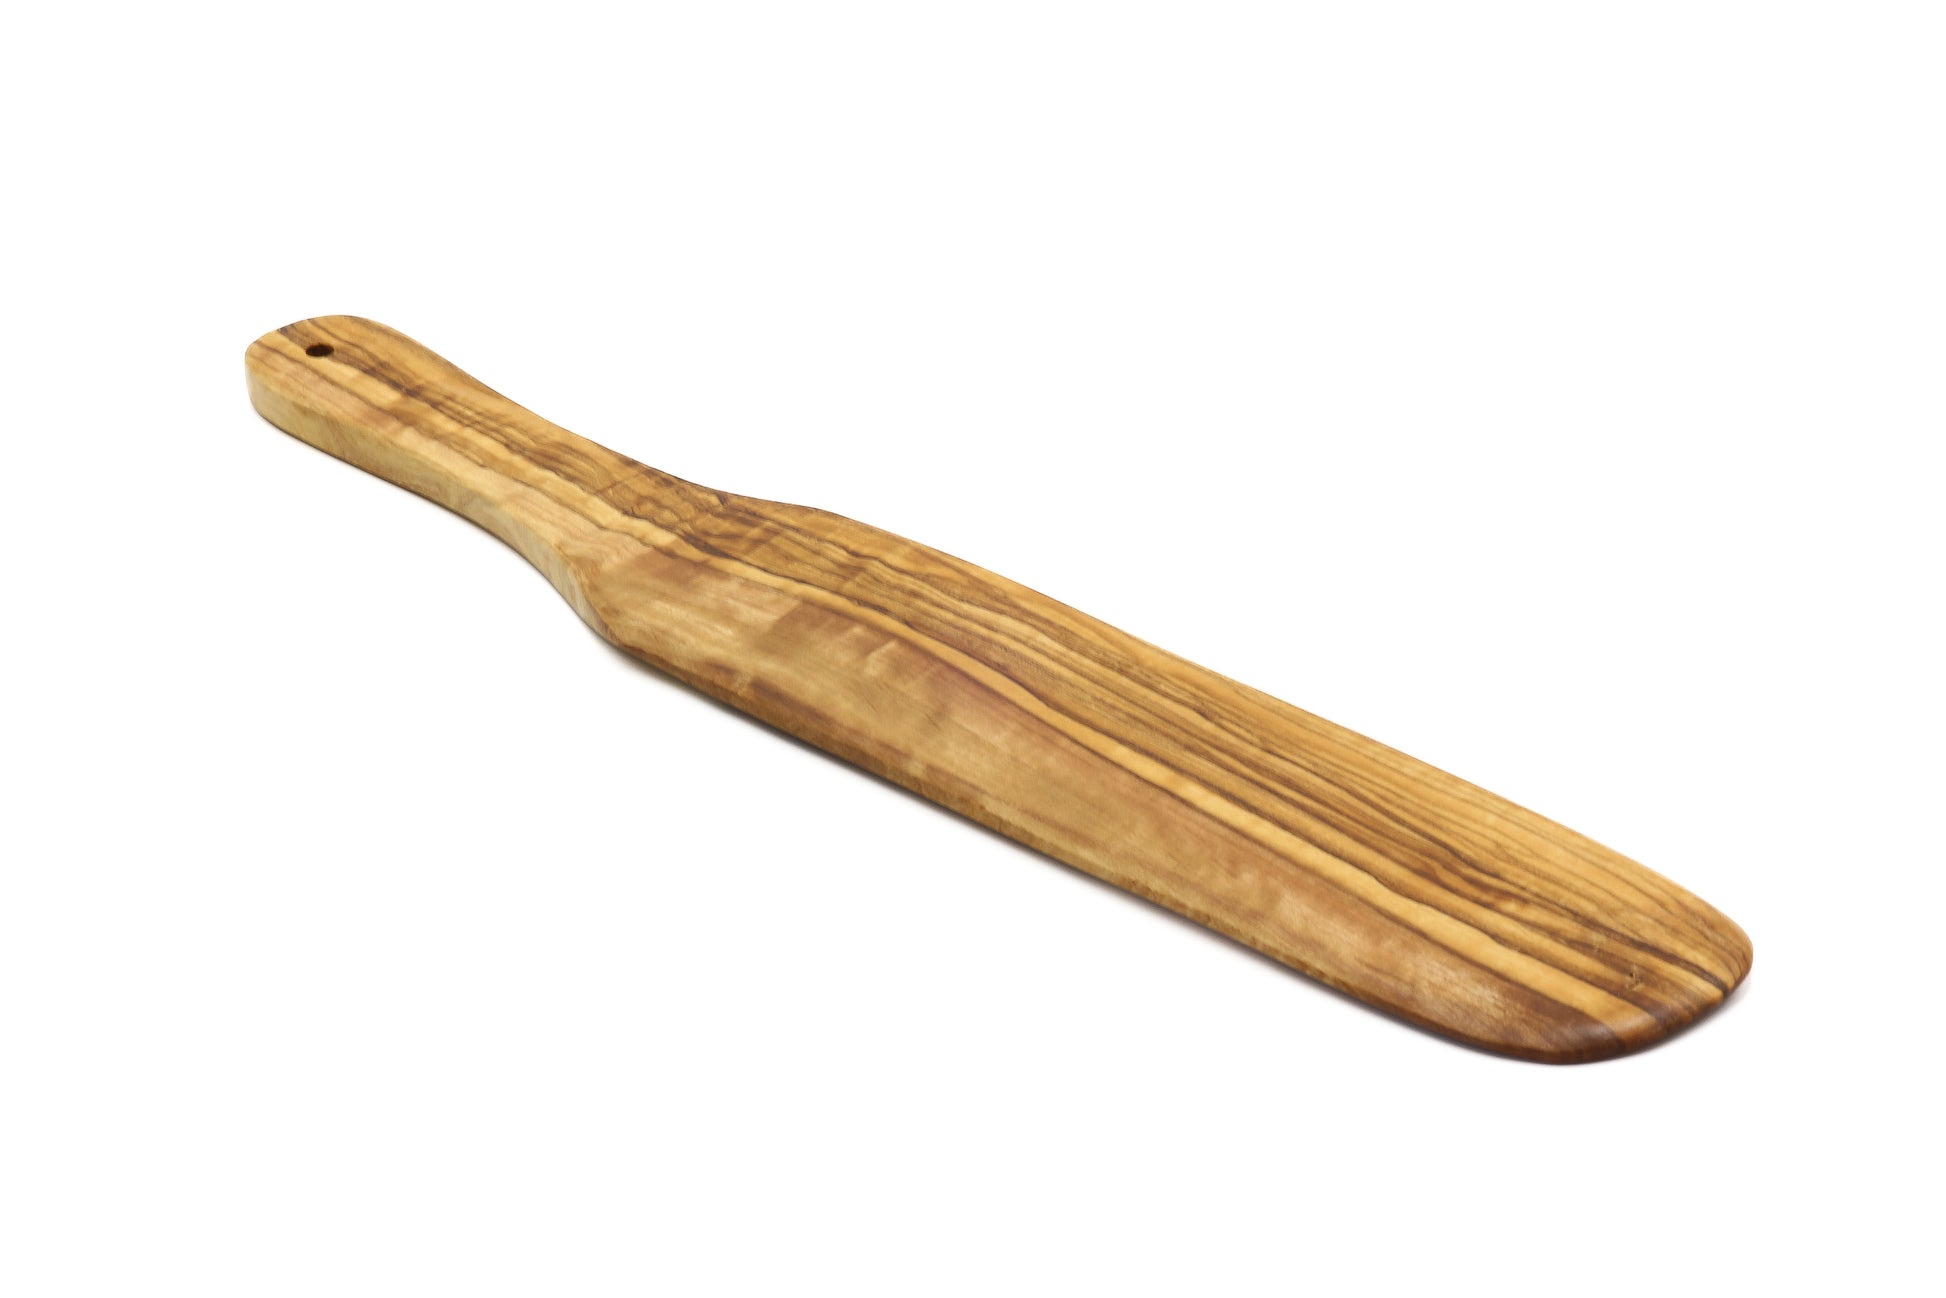 Hand-finished olive wood crêpe utensil for culinary tasks